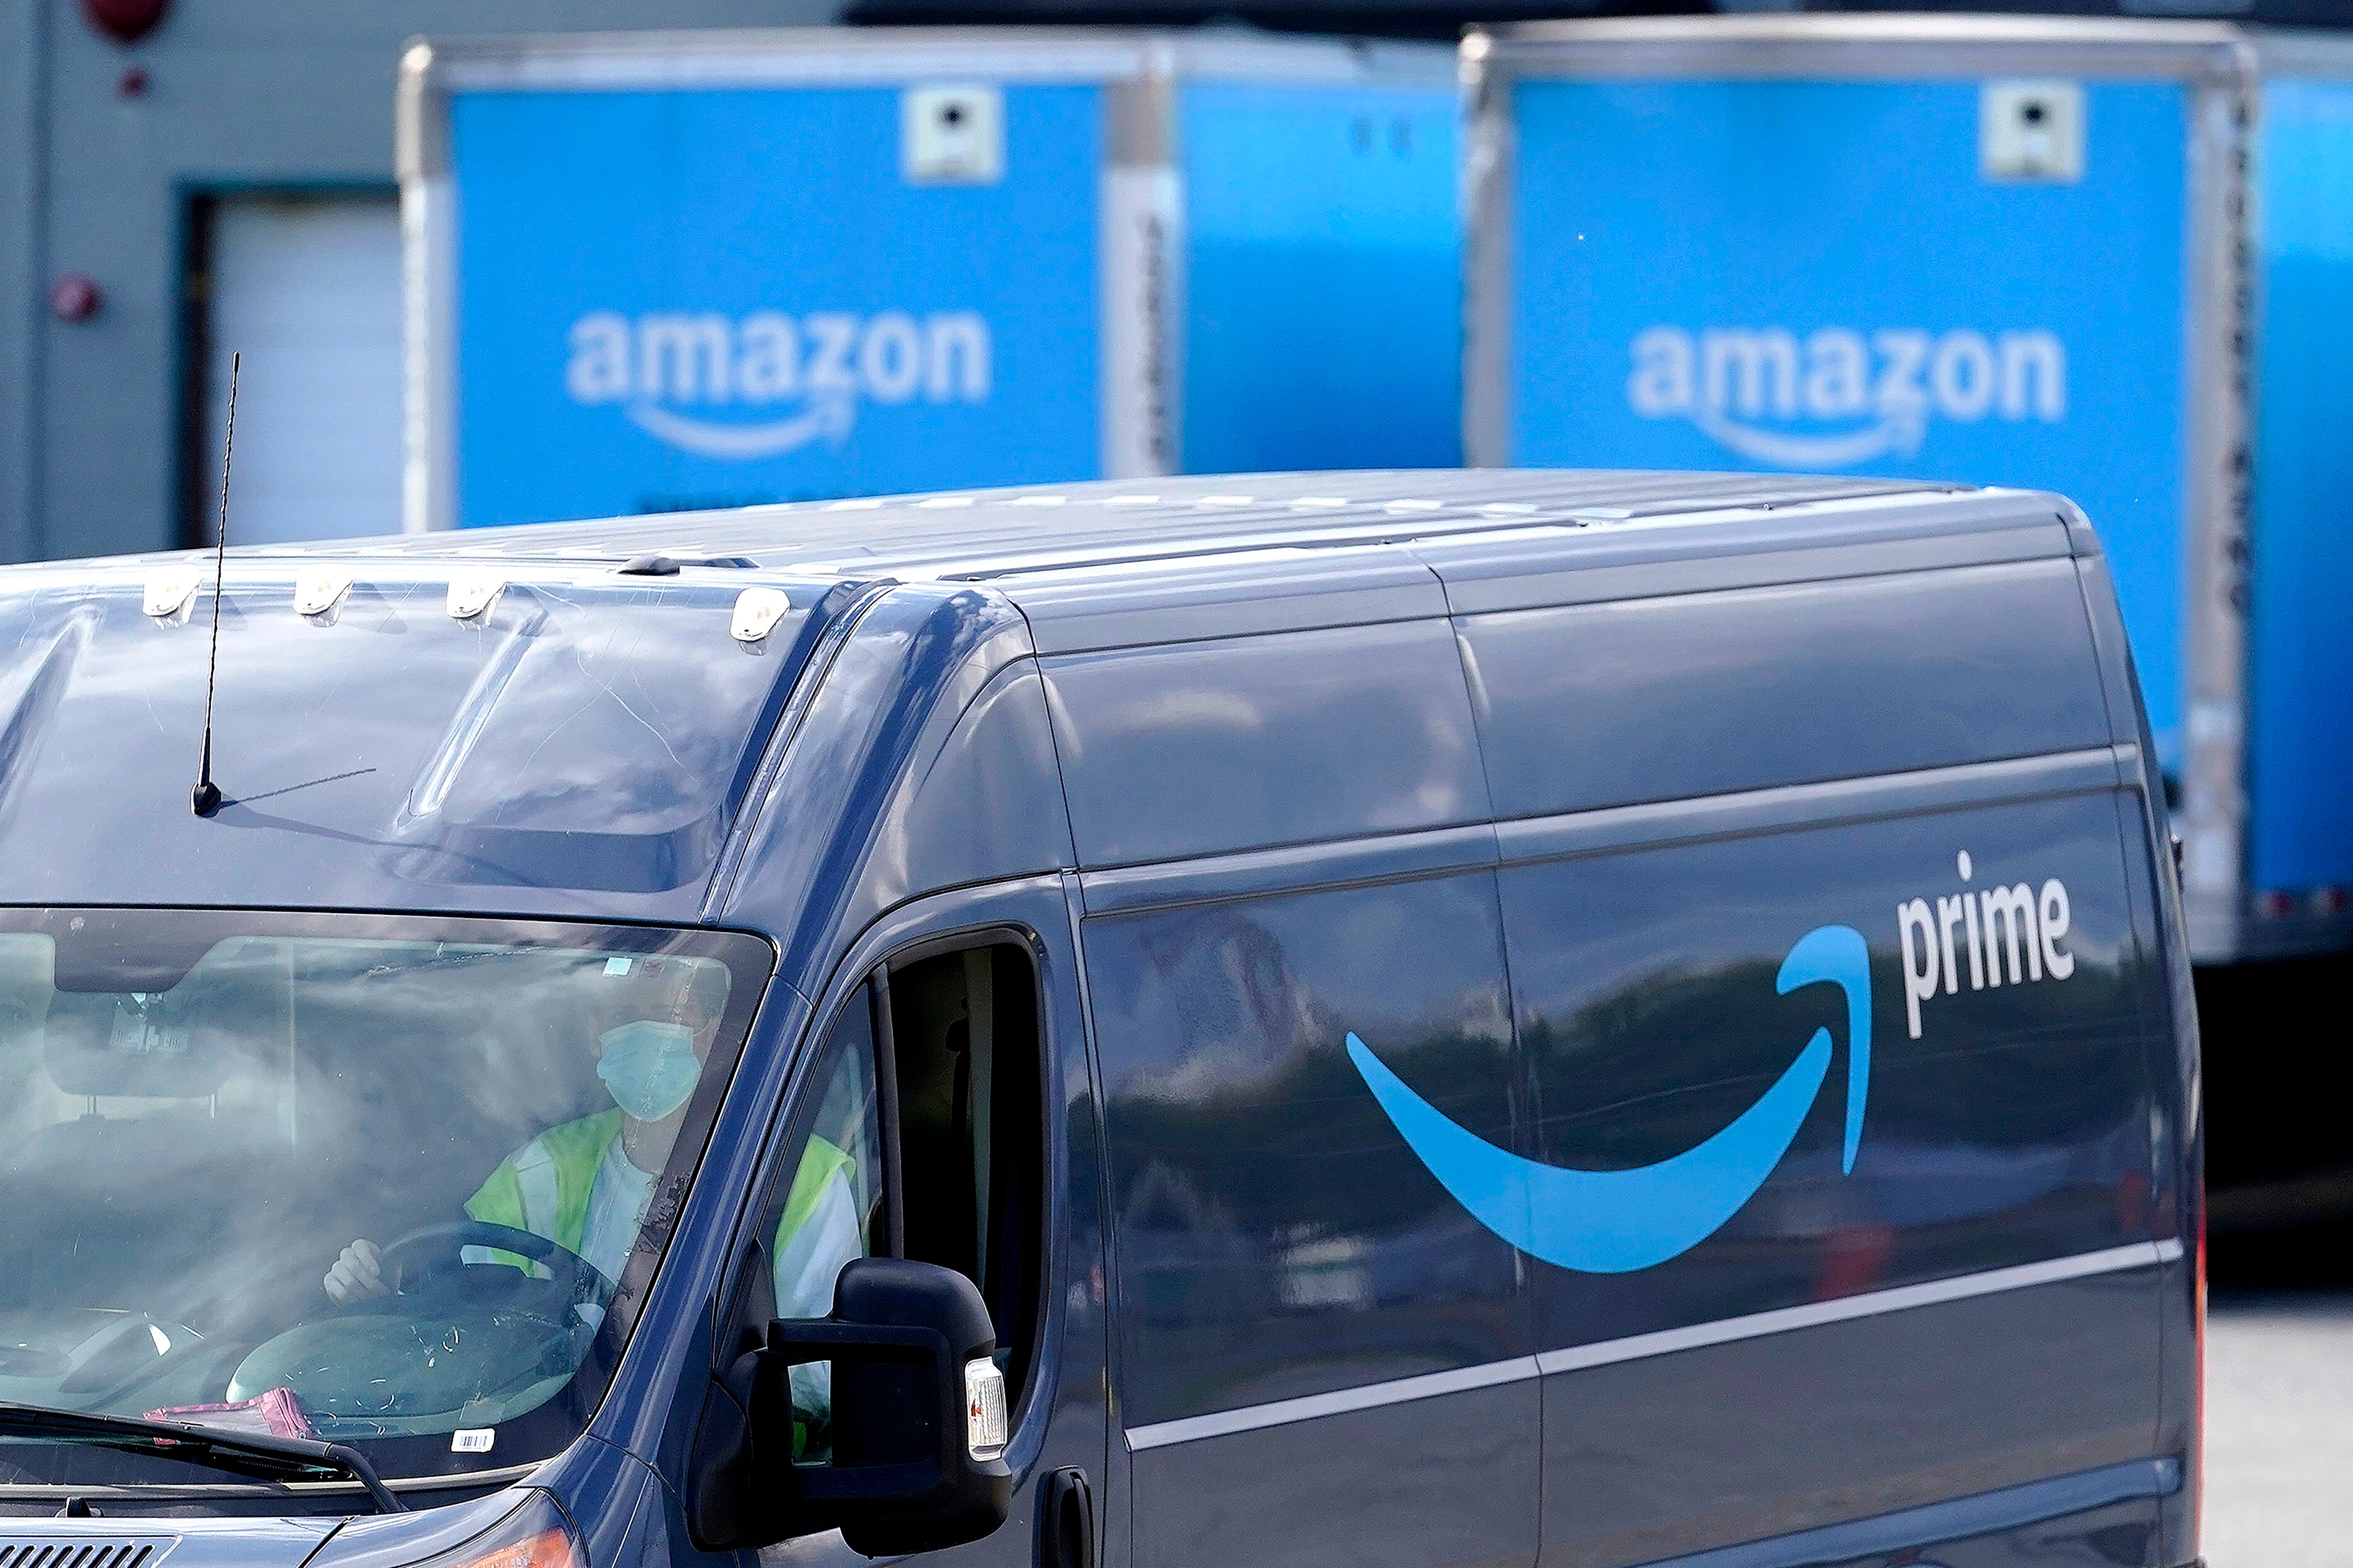 Amazon to raise Prime fees in Europe, cites rising costs The Independent